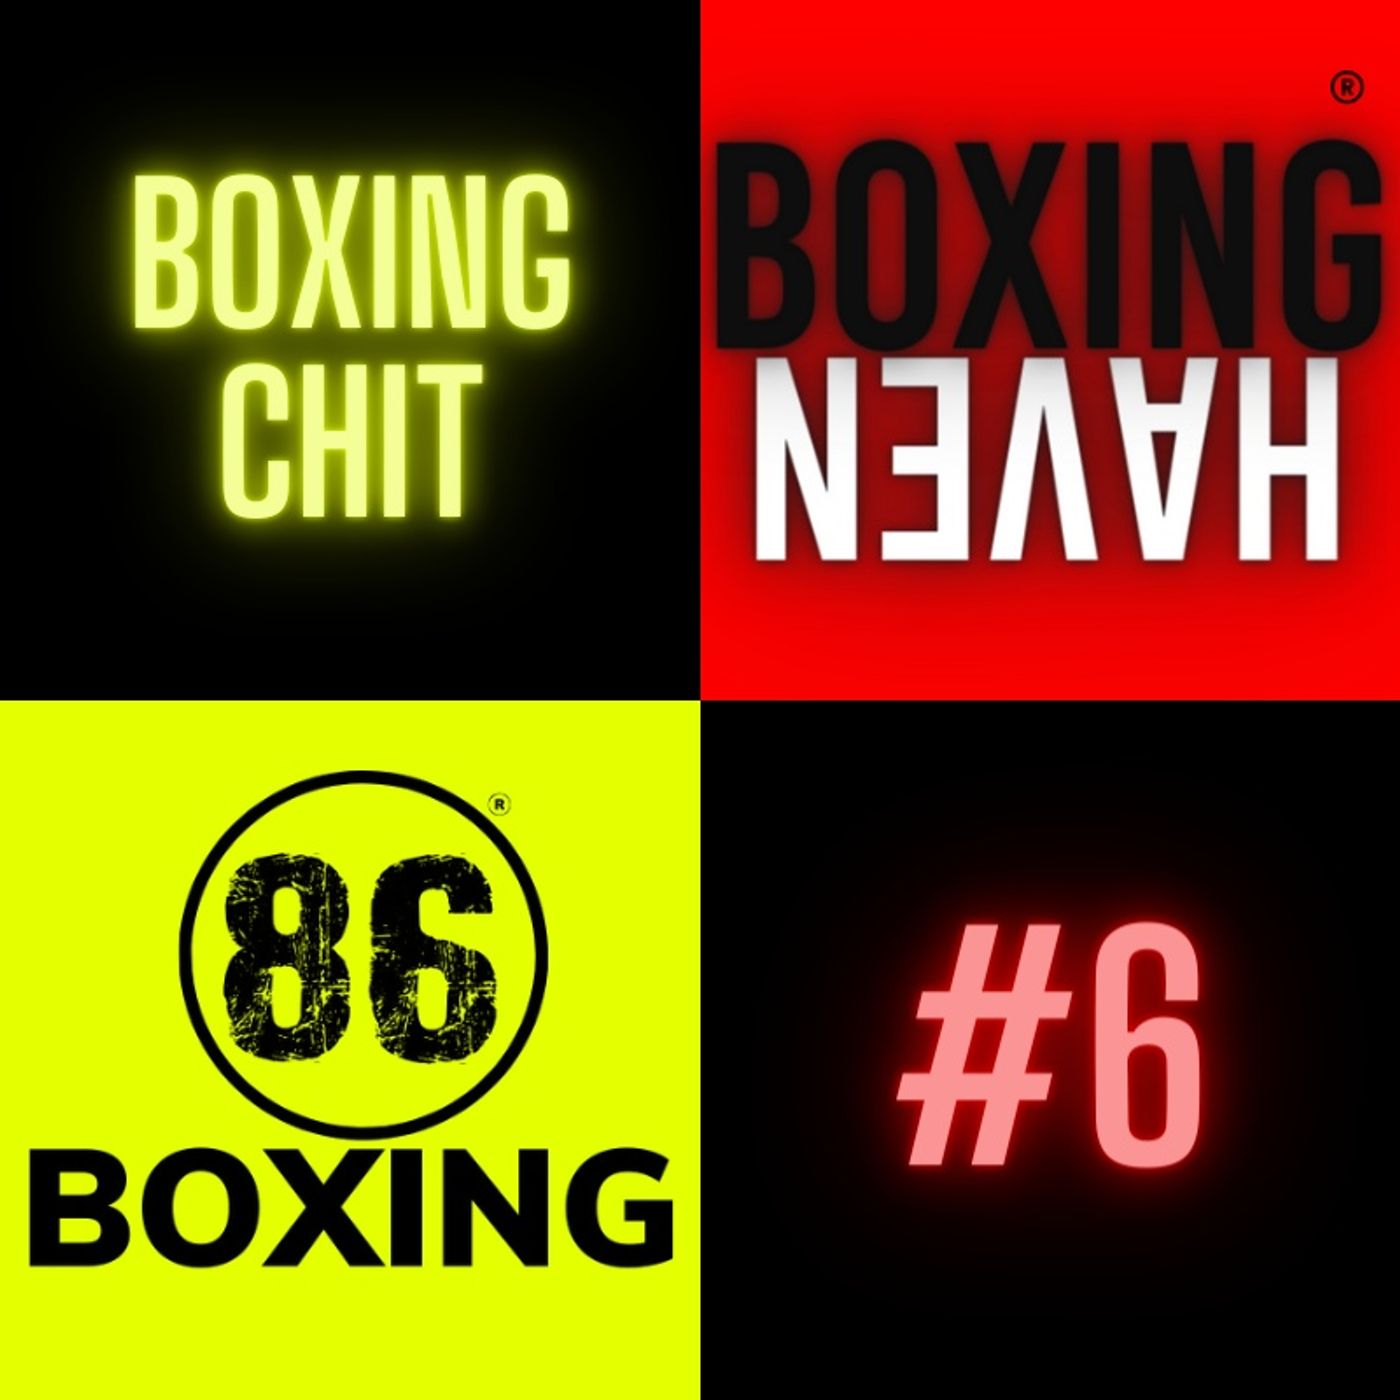 E33: 86Boxing x Boxing Haven: Boxing Chit 6 | Catterall x Taylor | Okolie | Cruiserweight | Fury x Whyte | & more...